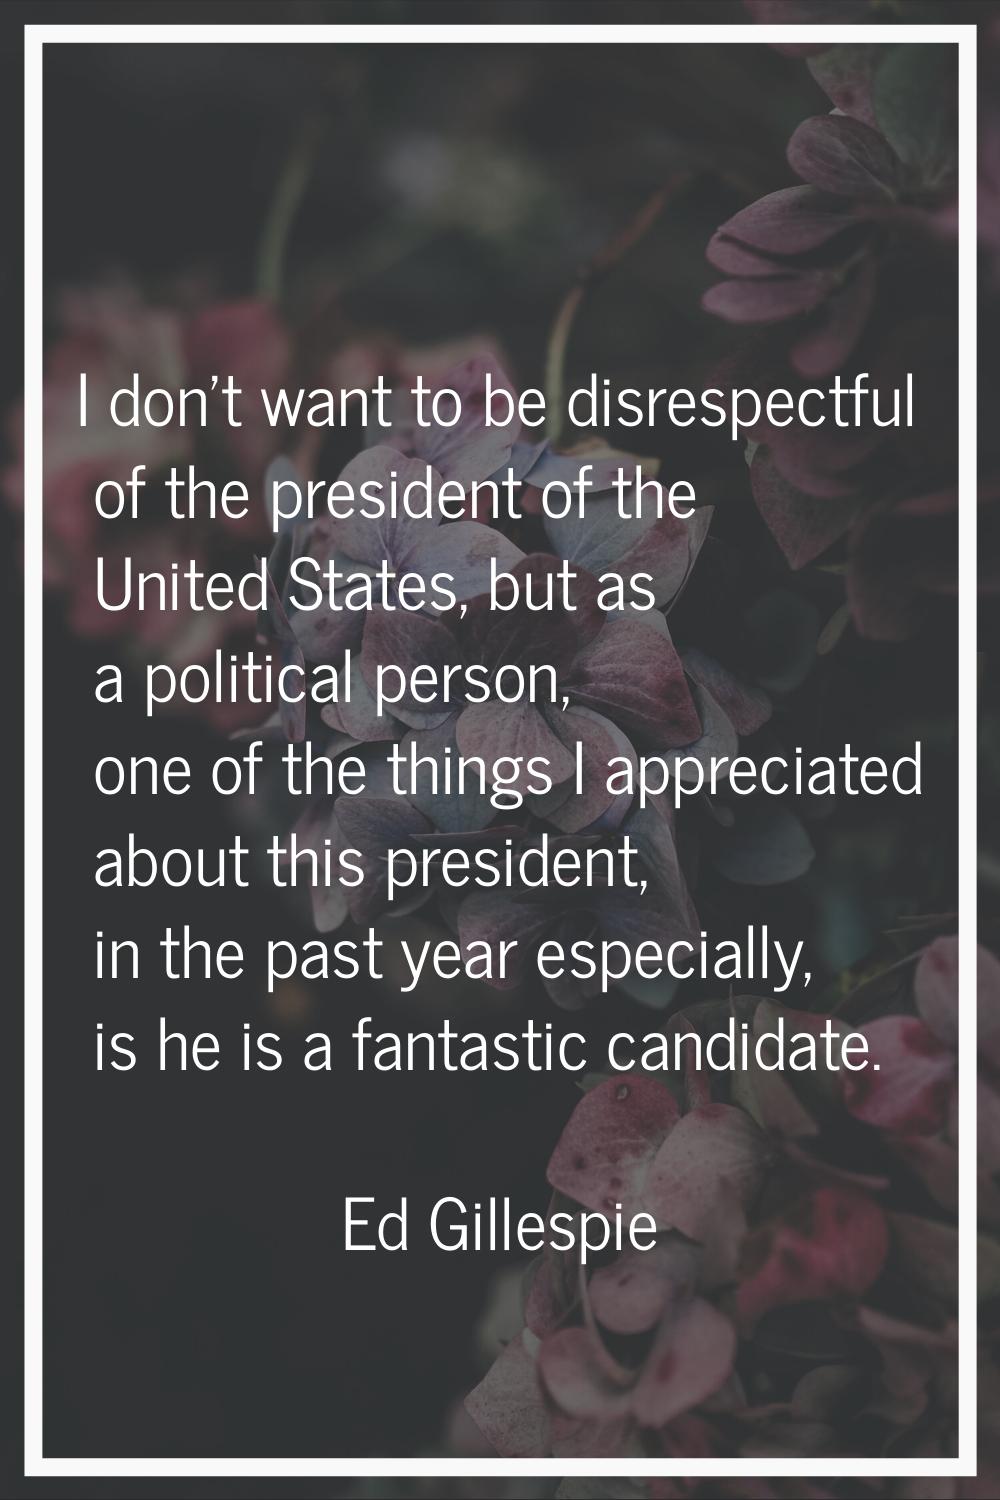 I don't want to be disrespectful of the president of the United States, but as a political person, 